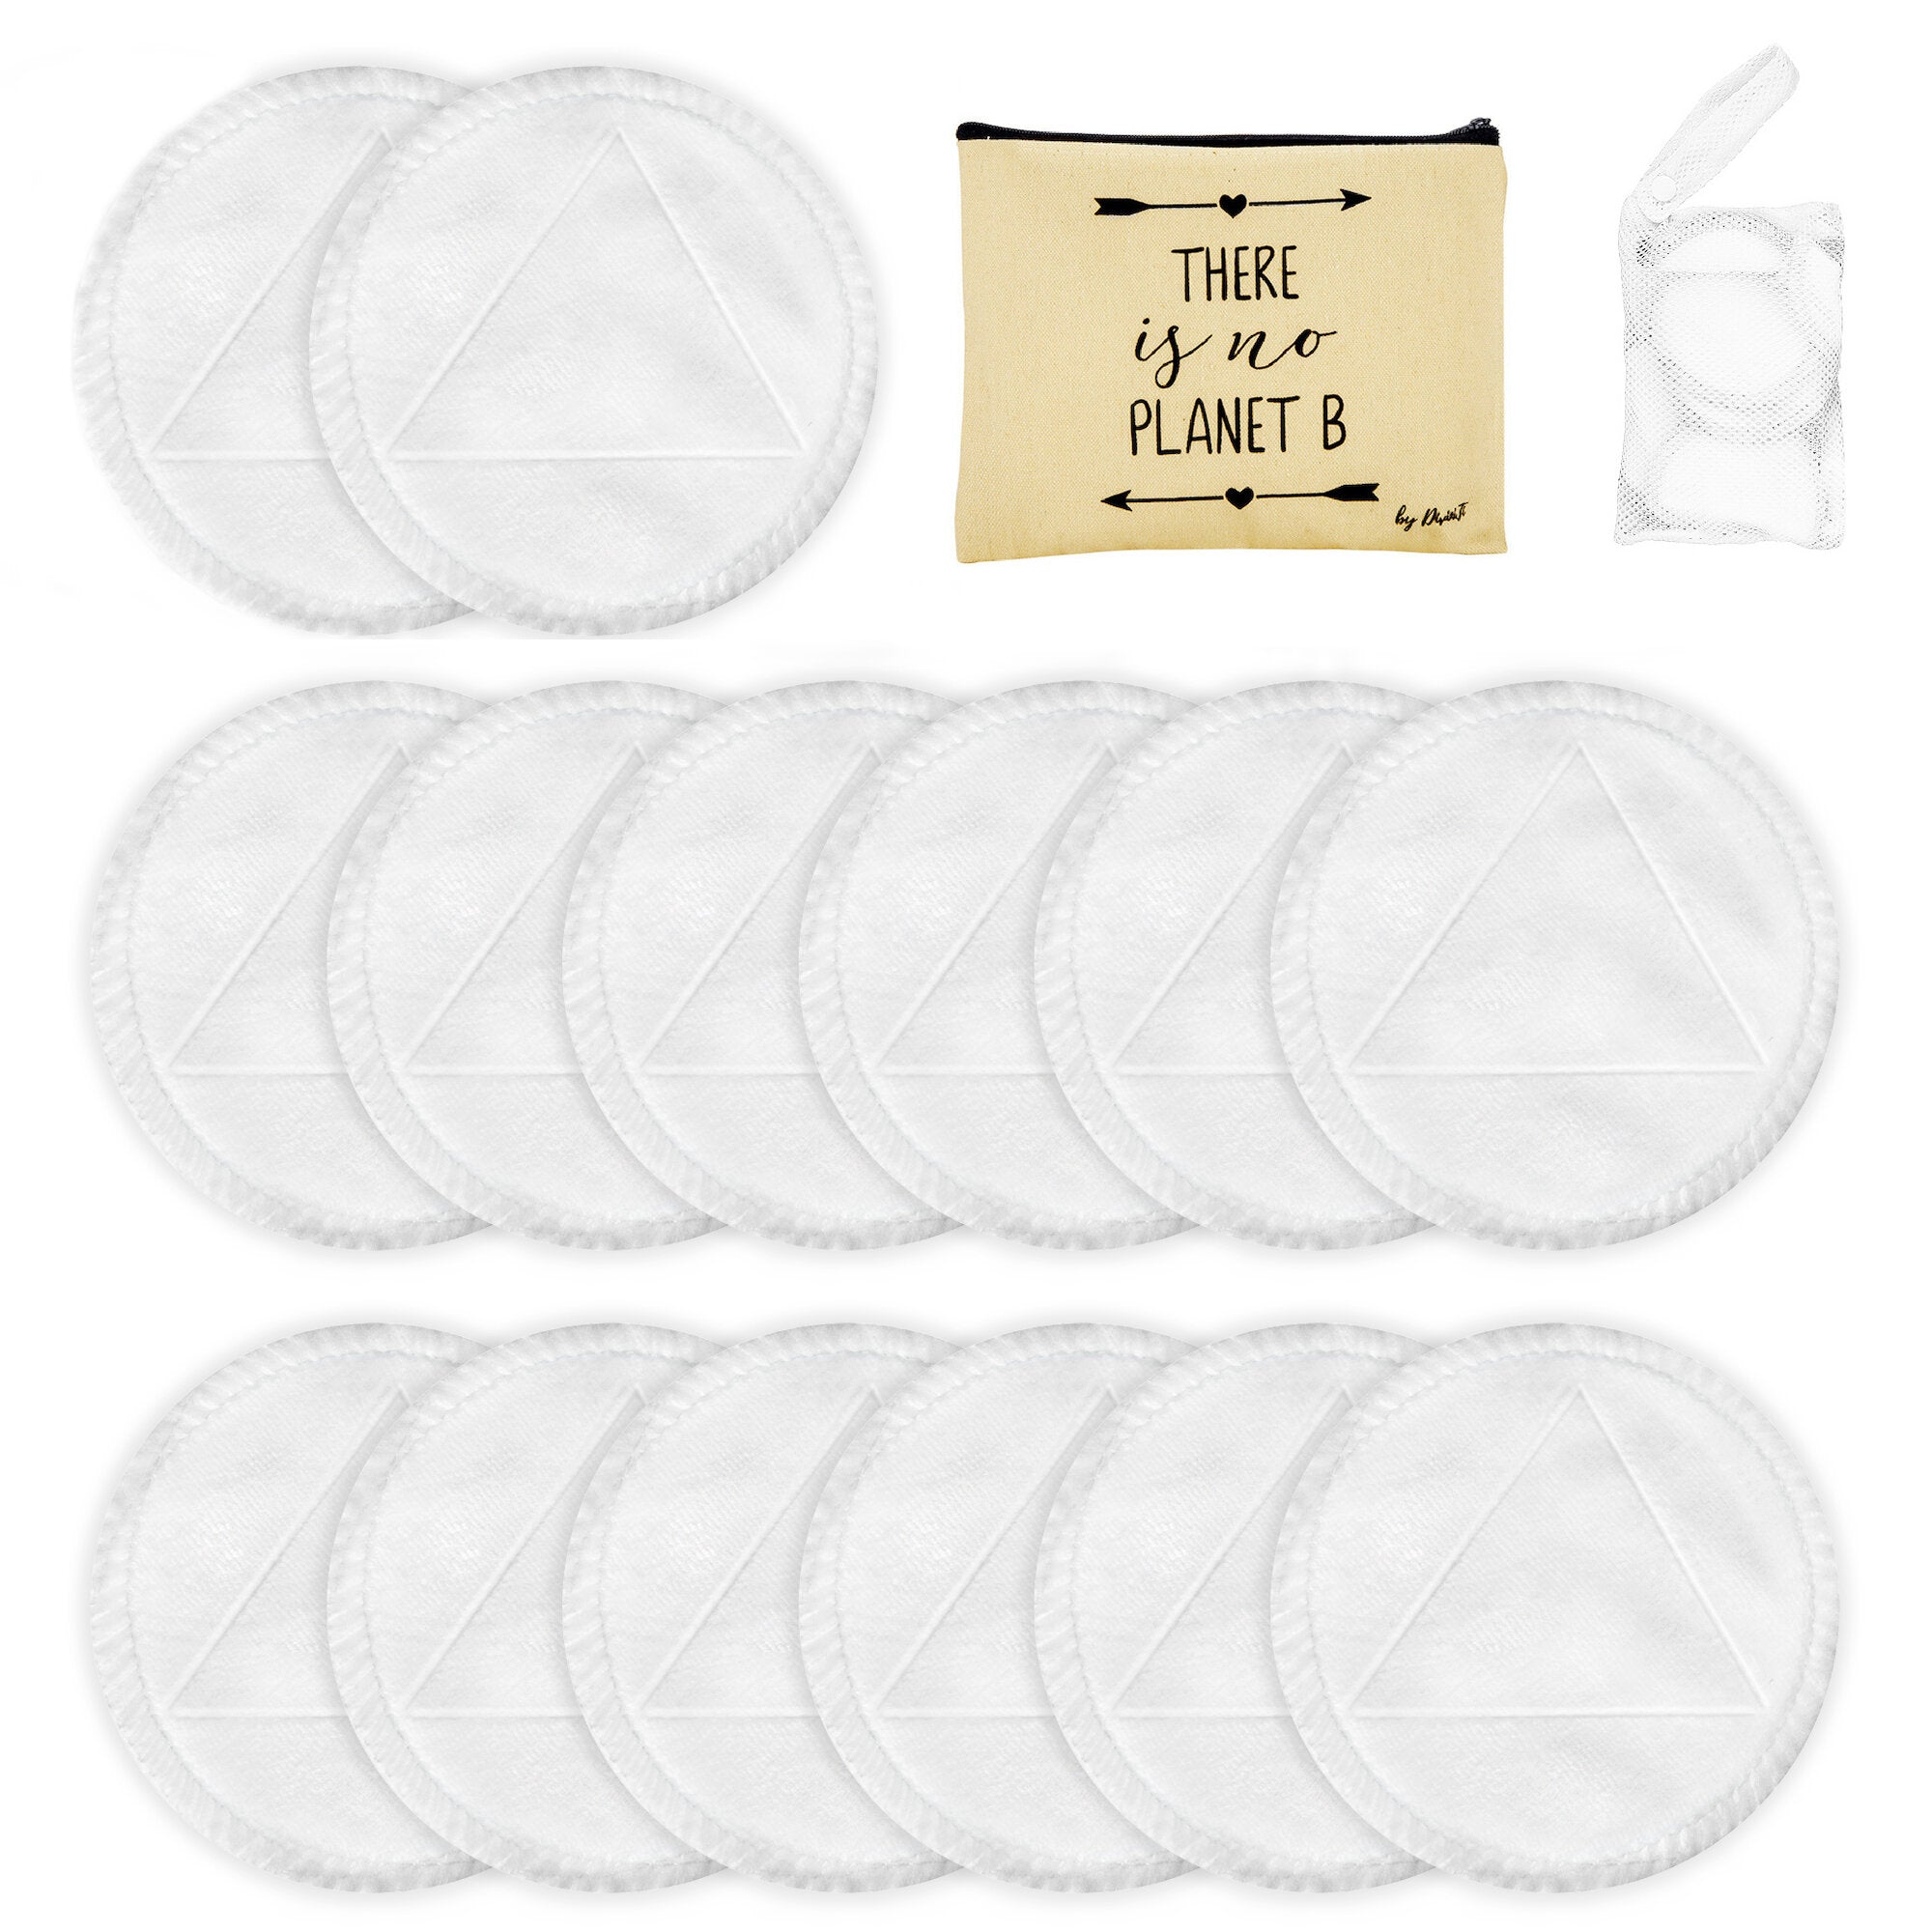 Bamboo Reusable Makeup Remover Pads in White